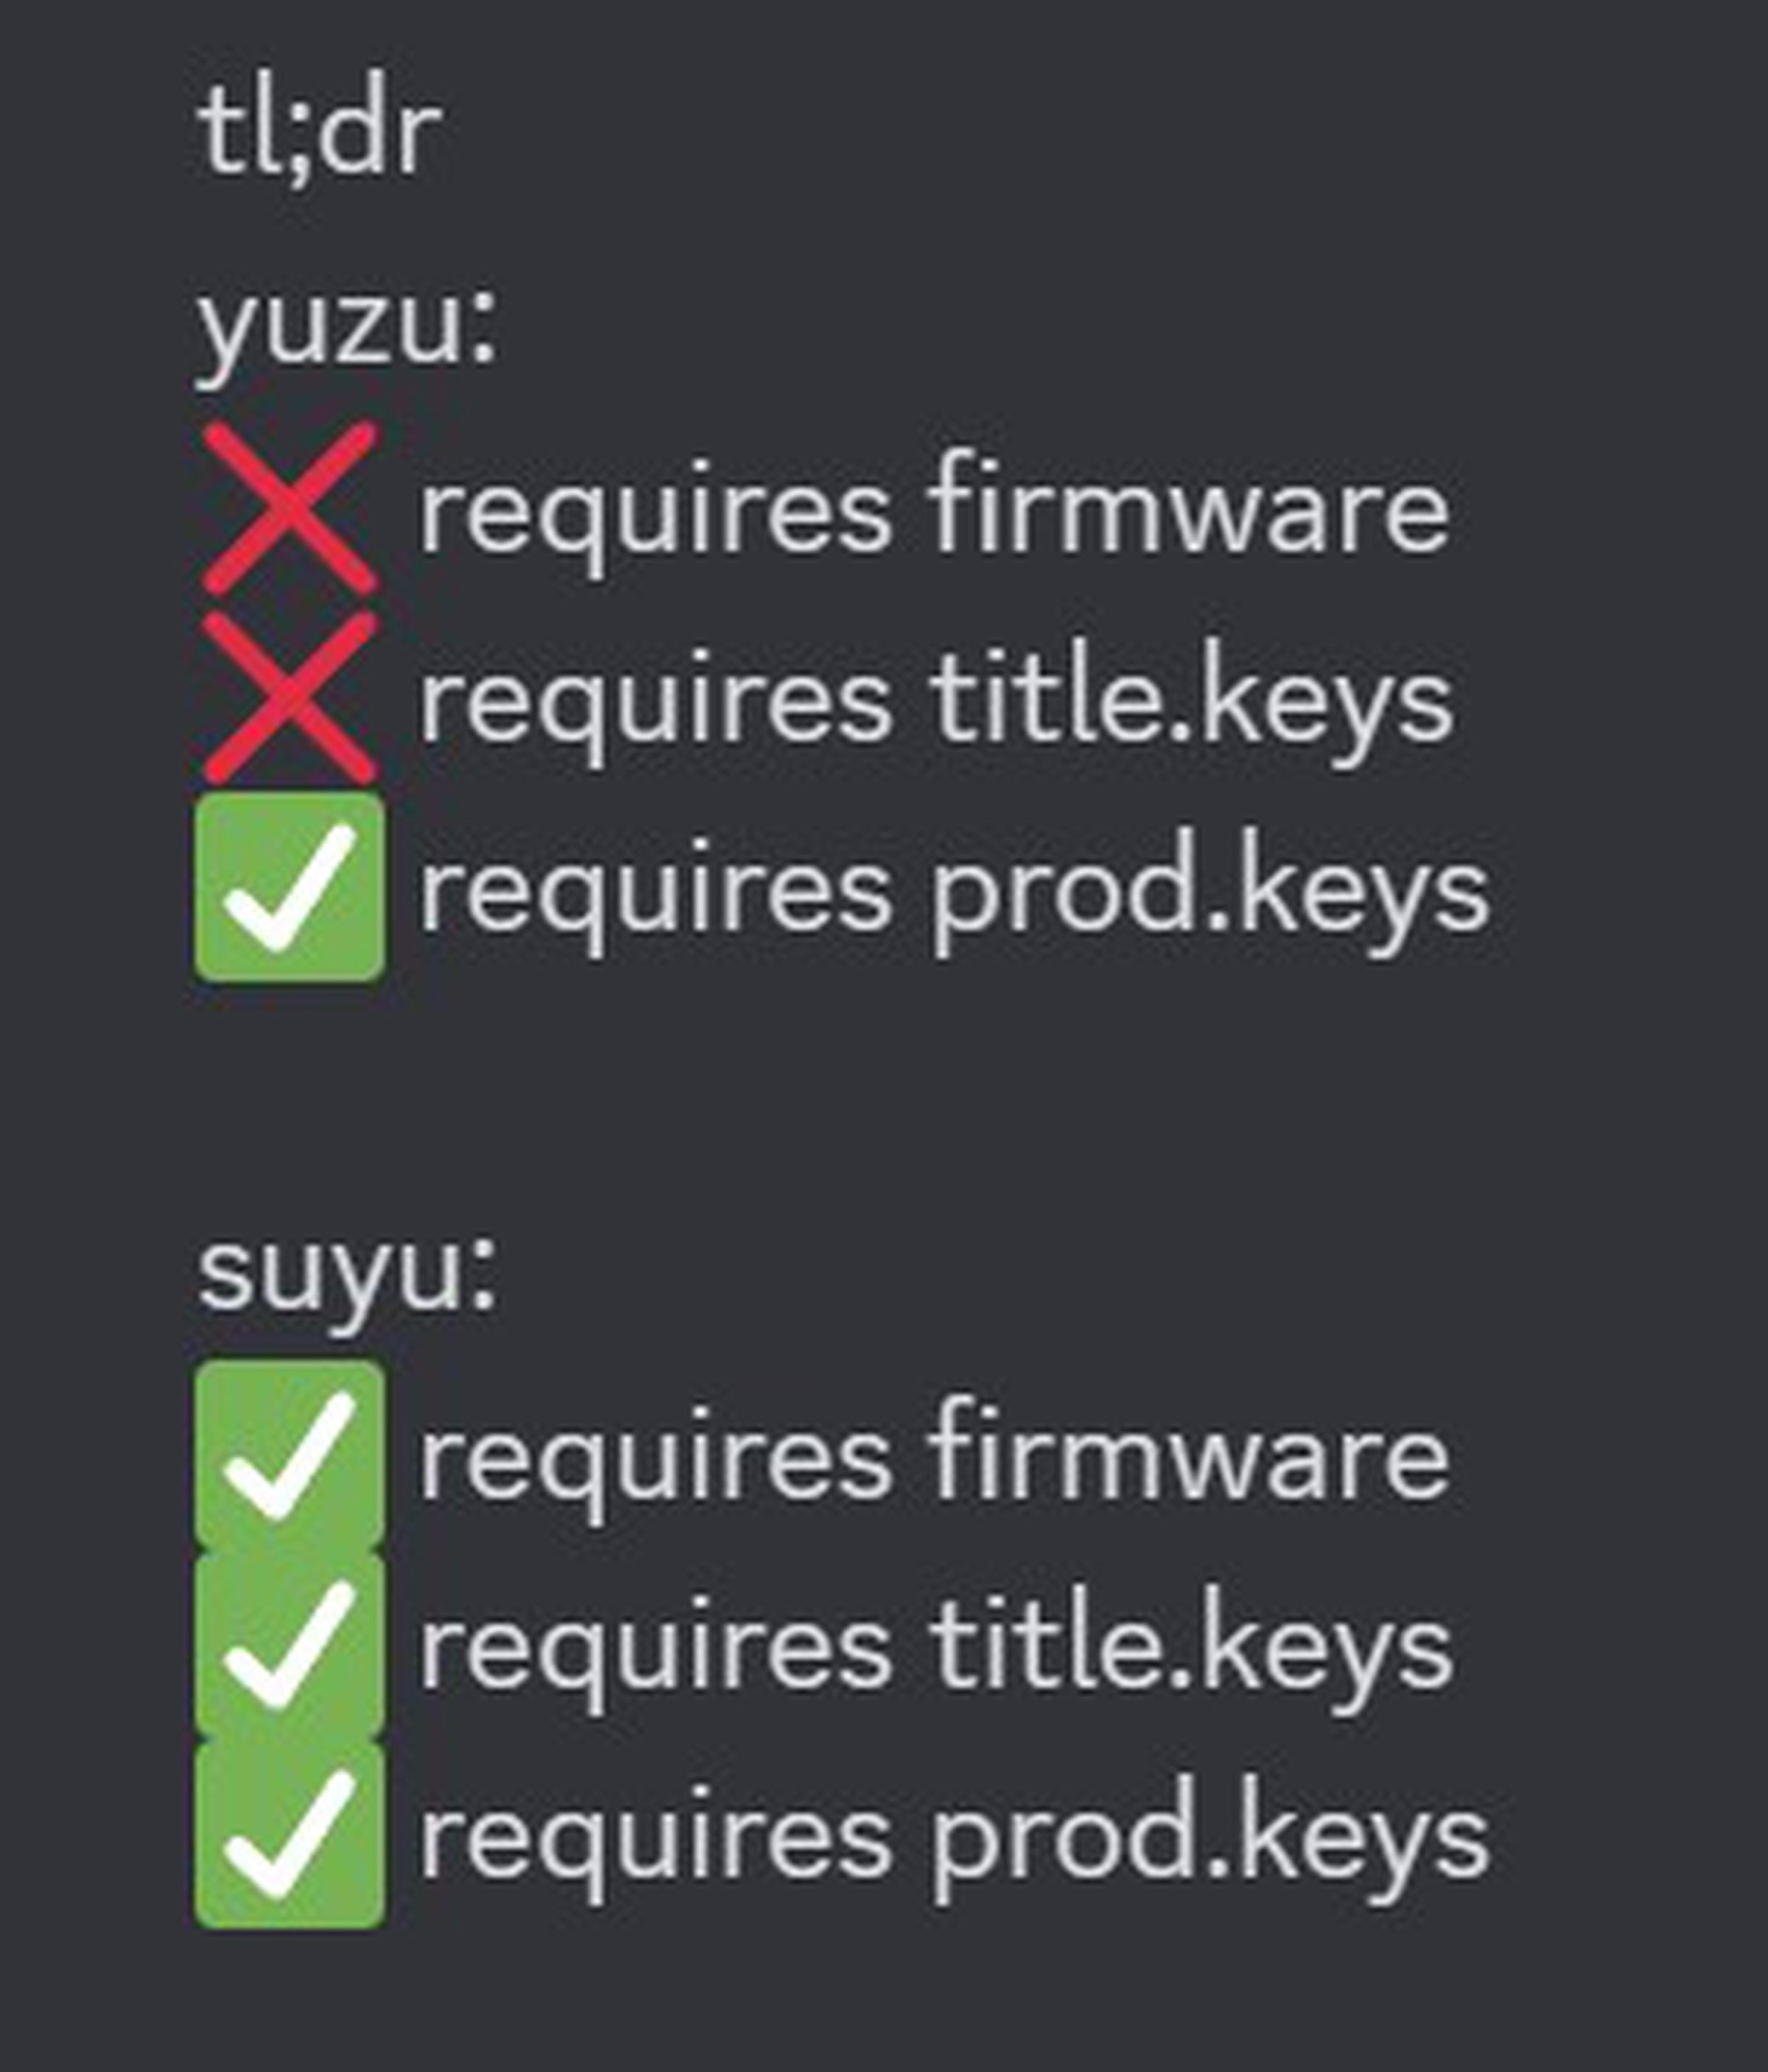 tl;dr yuzu doesn’t require firmware or title.keys, just prod.keys, while suyu requires all three